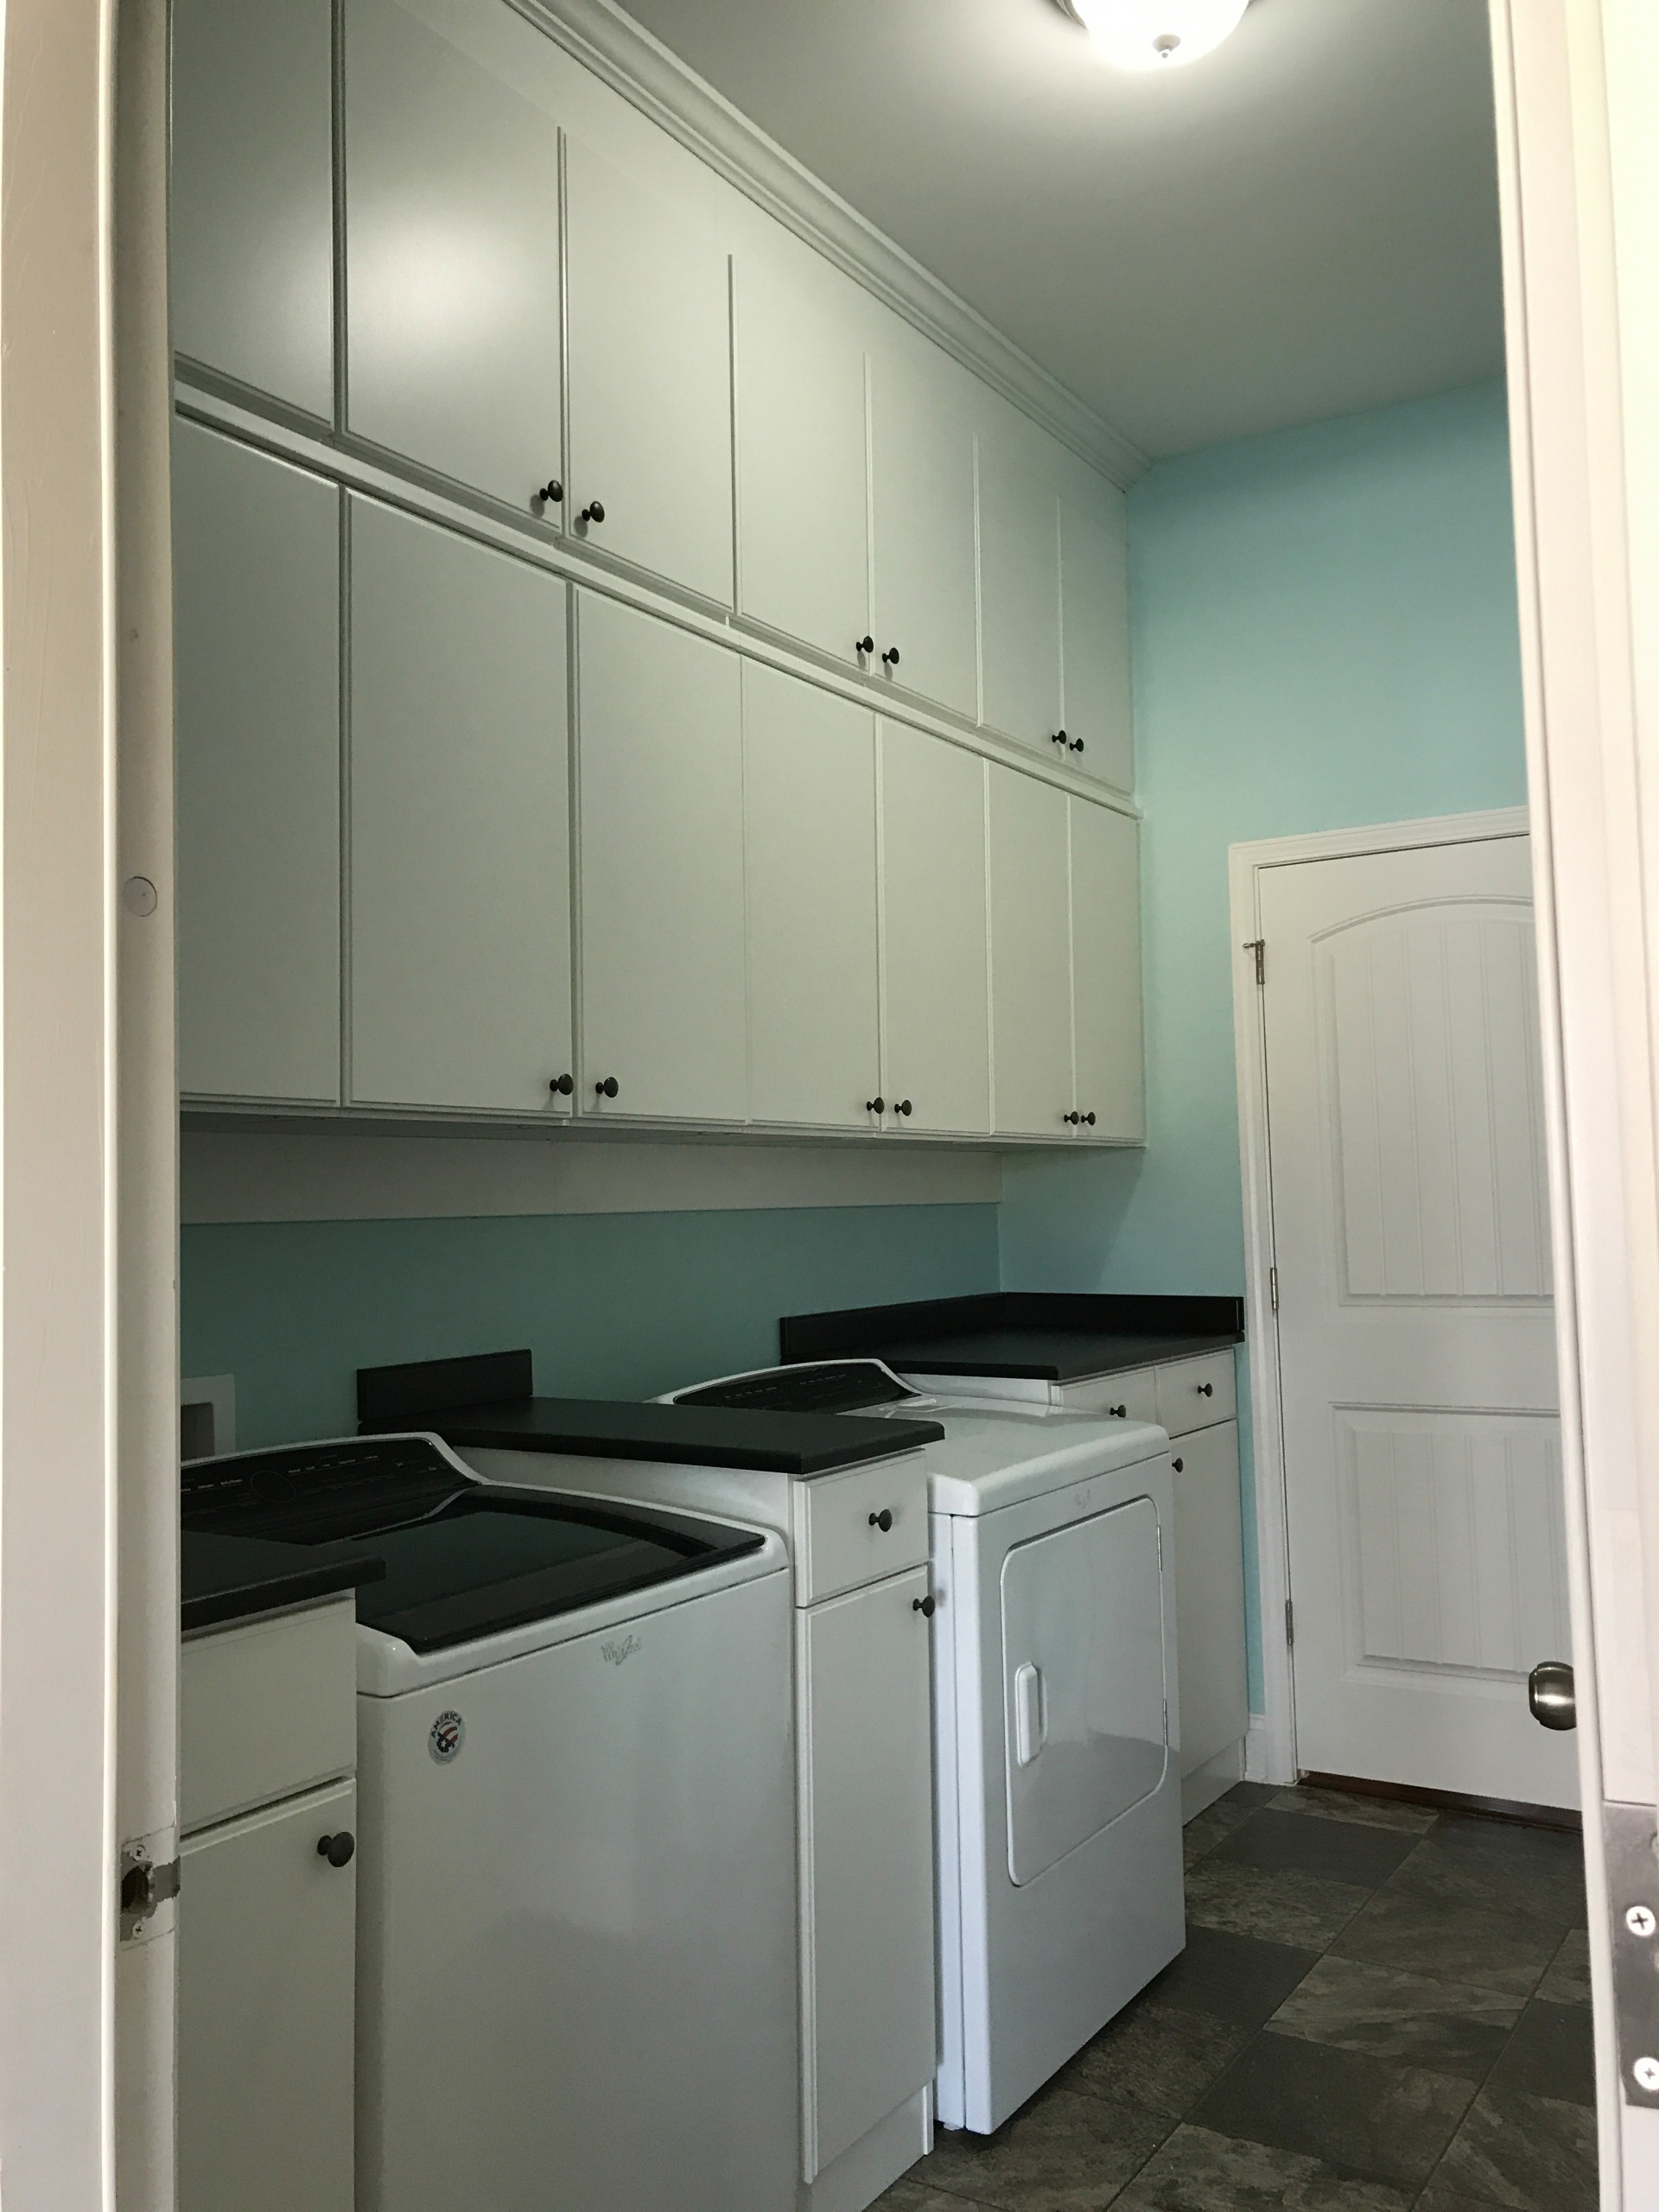 Laundry Room with Wall-Hung Cabinets and Counter Space